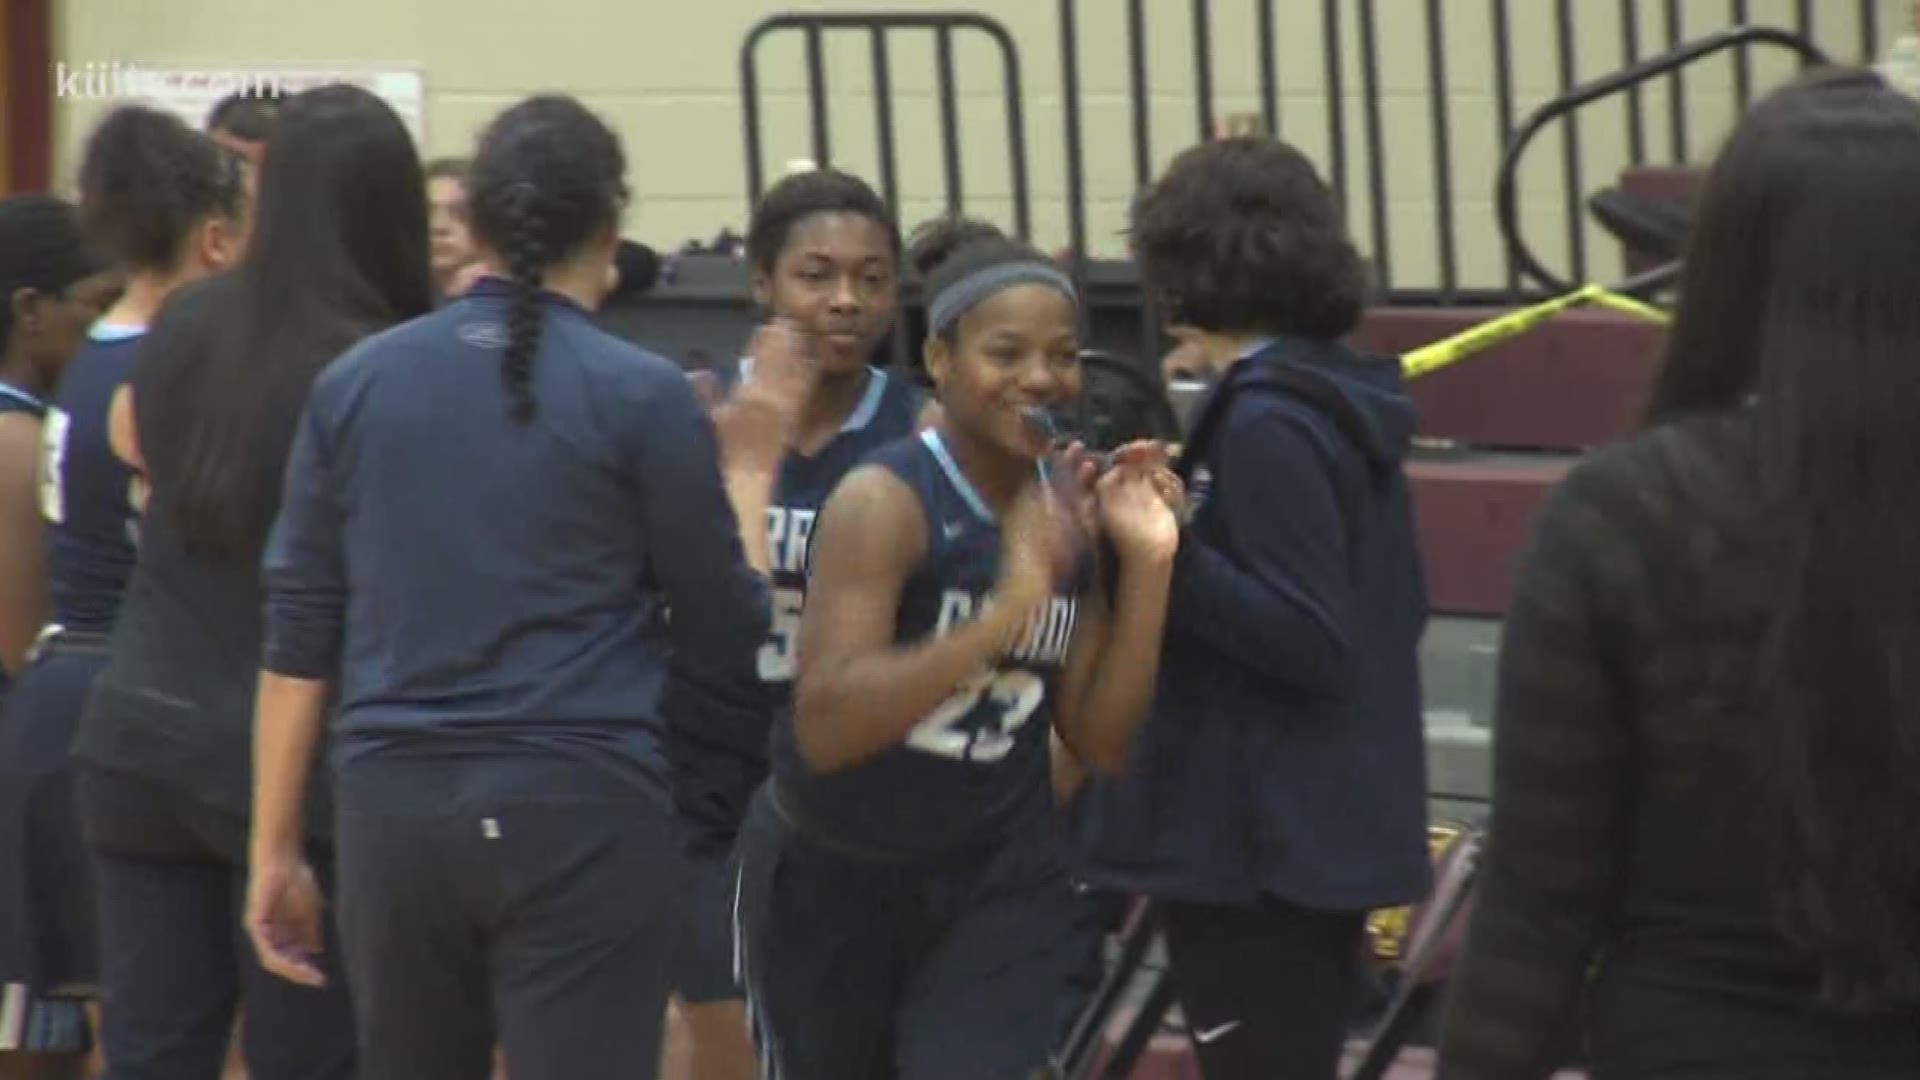 A pair of highlights from Monday night's Bi-District round of the girls basketball playoffs.